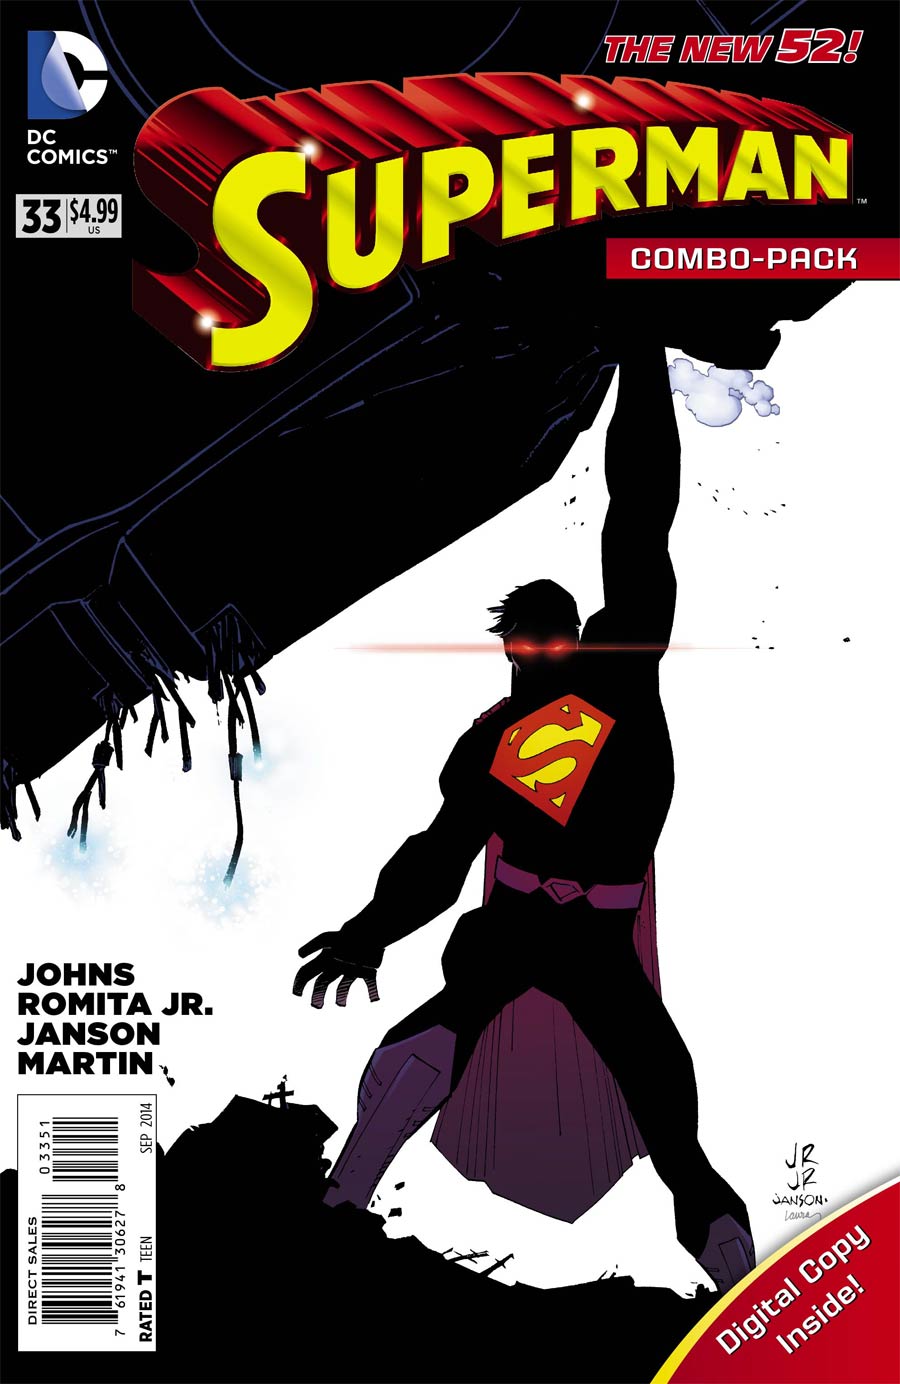 Superman Vol 4 #33 Cover D Combo Pack Without Polybag